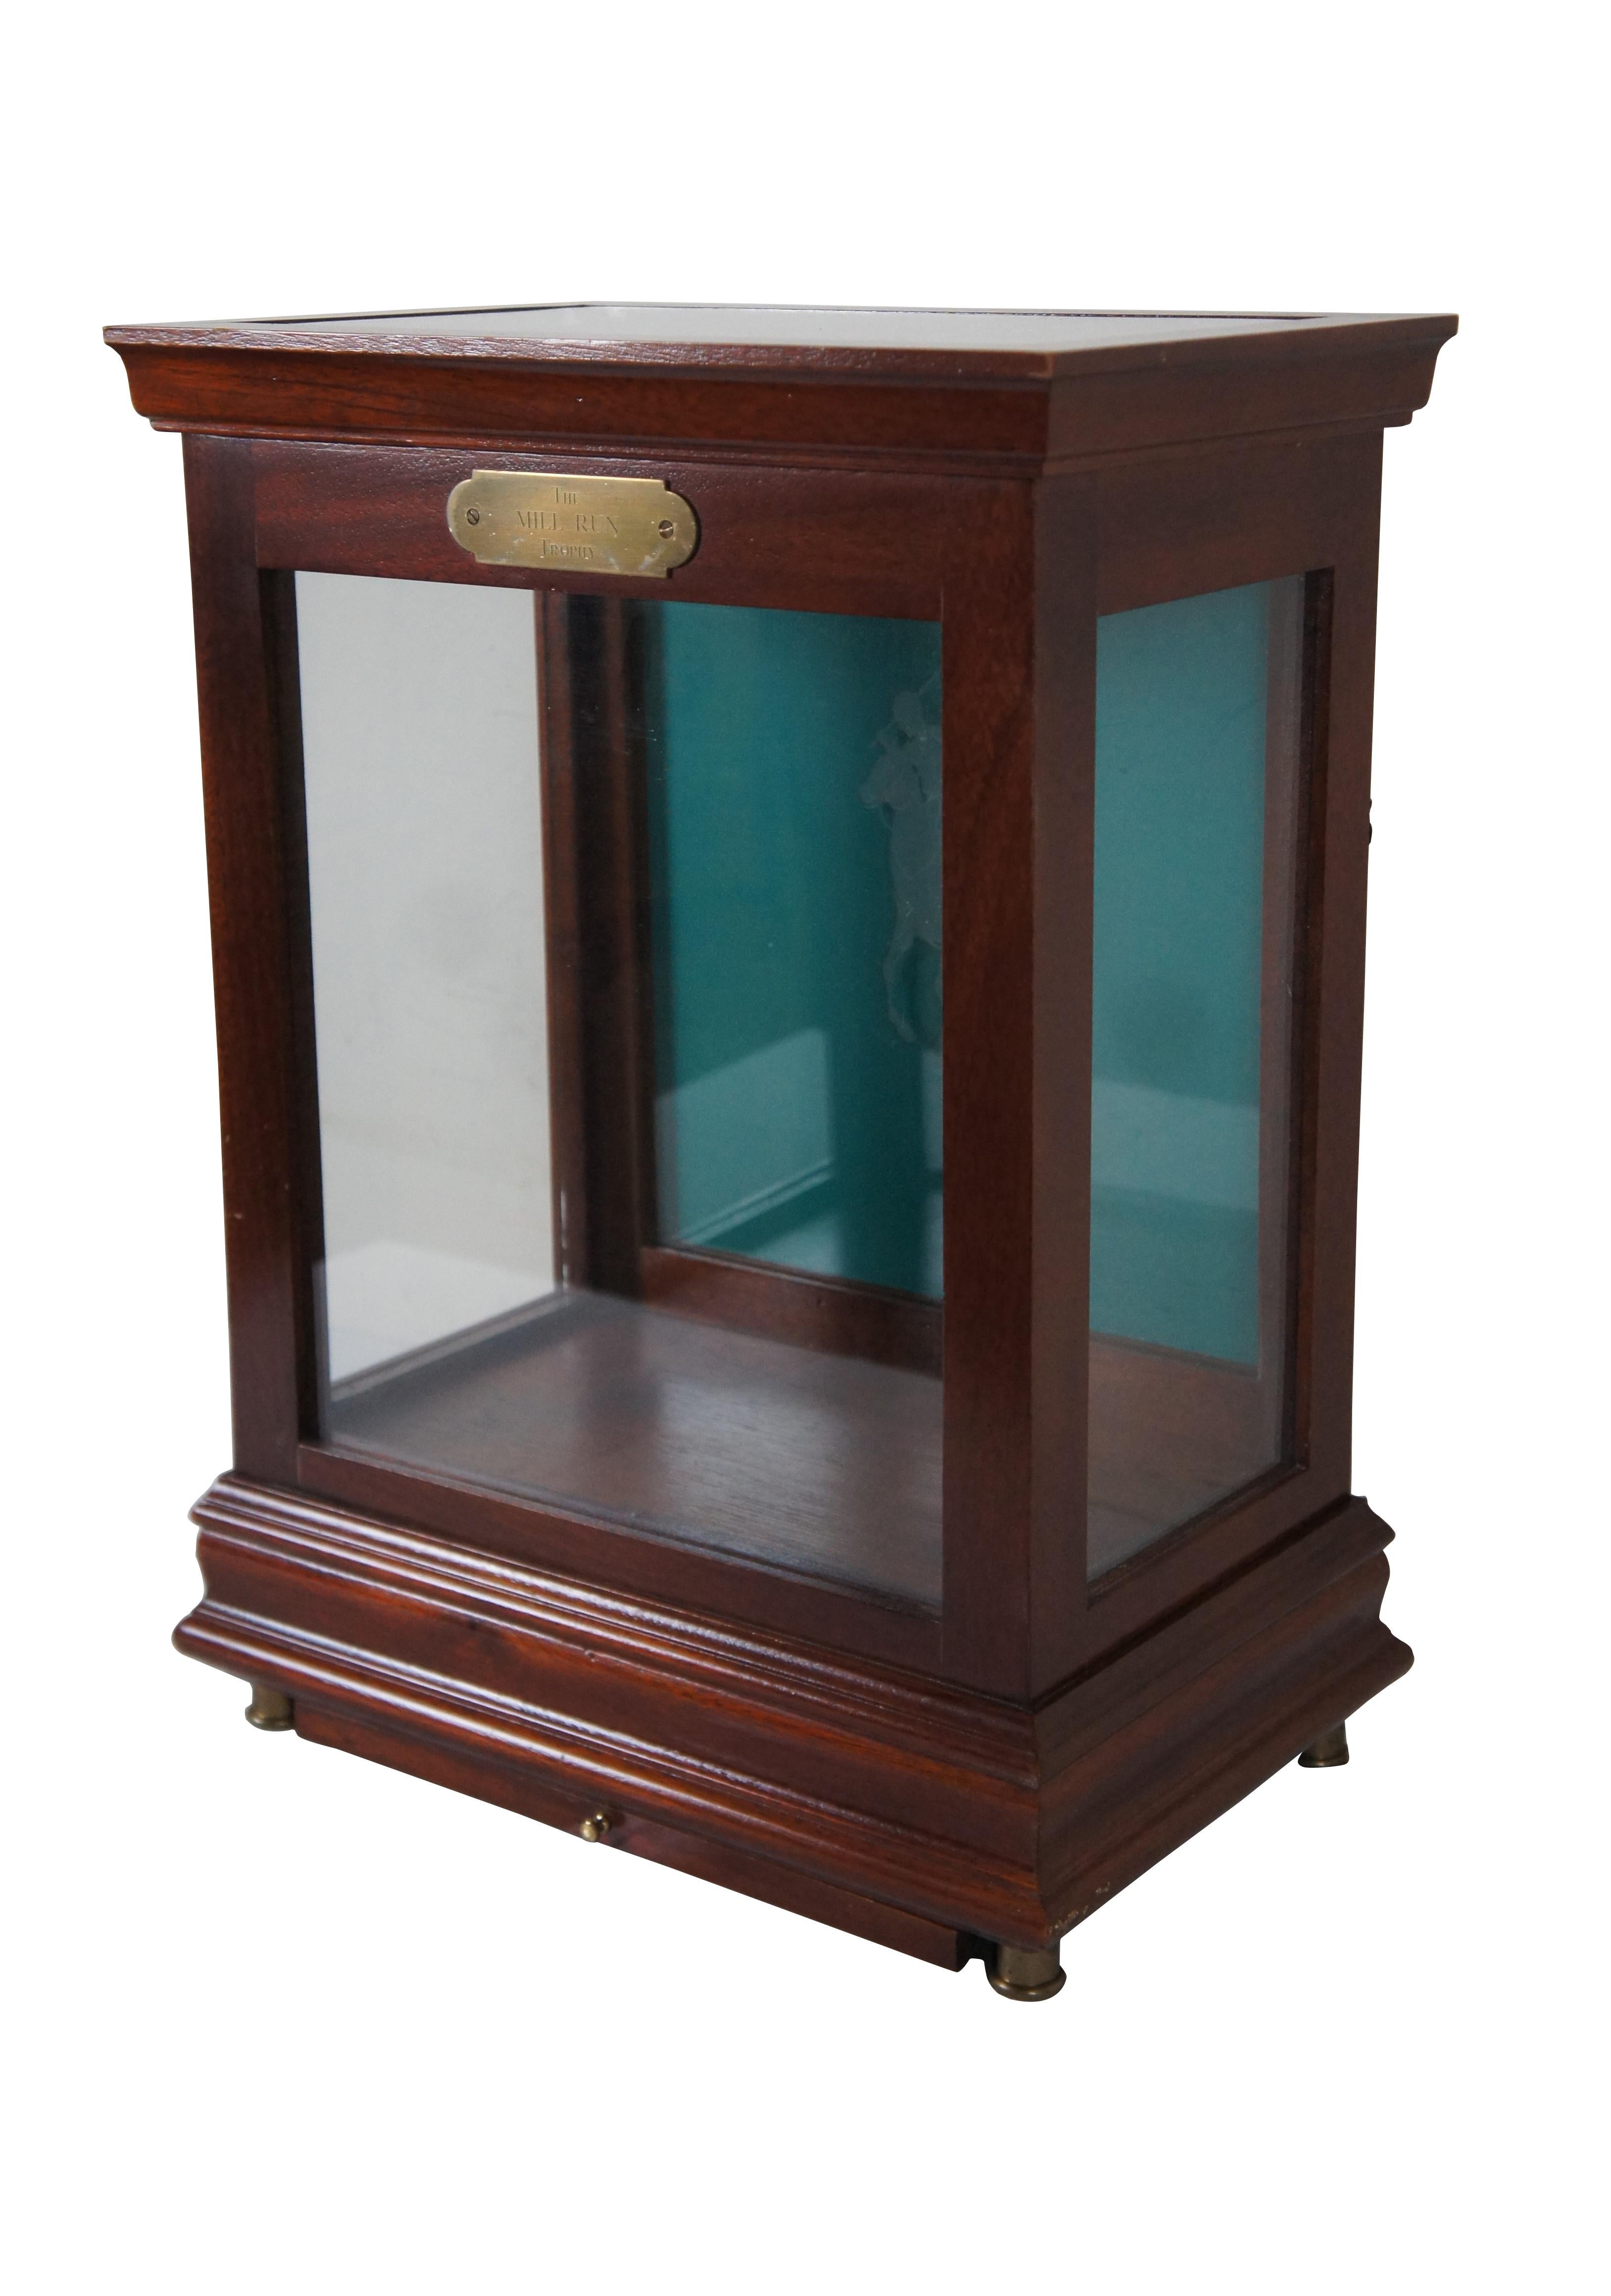 Polo Ralph Lauren tabletop display case made of mahogany with brass feet, small drawer at base, and glass sides and removable glass top. The removable back of the interior is colored robin’s egg blue with a glass overlay featuring the etched image